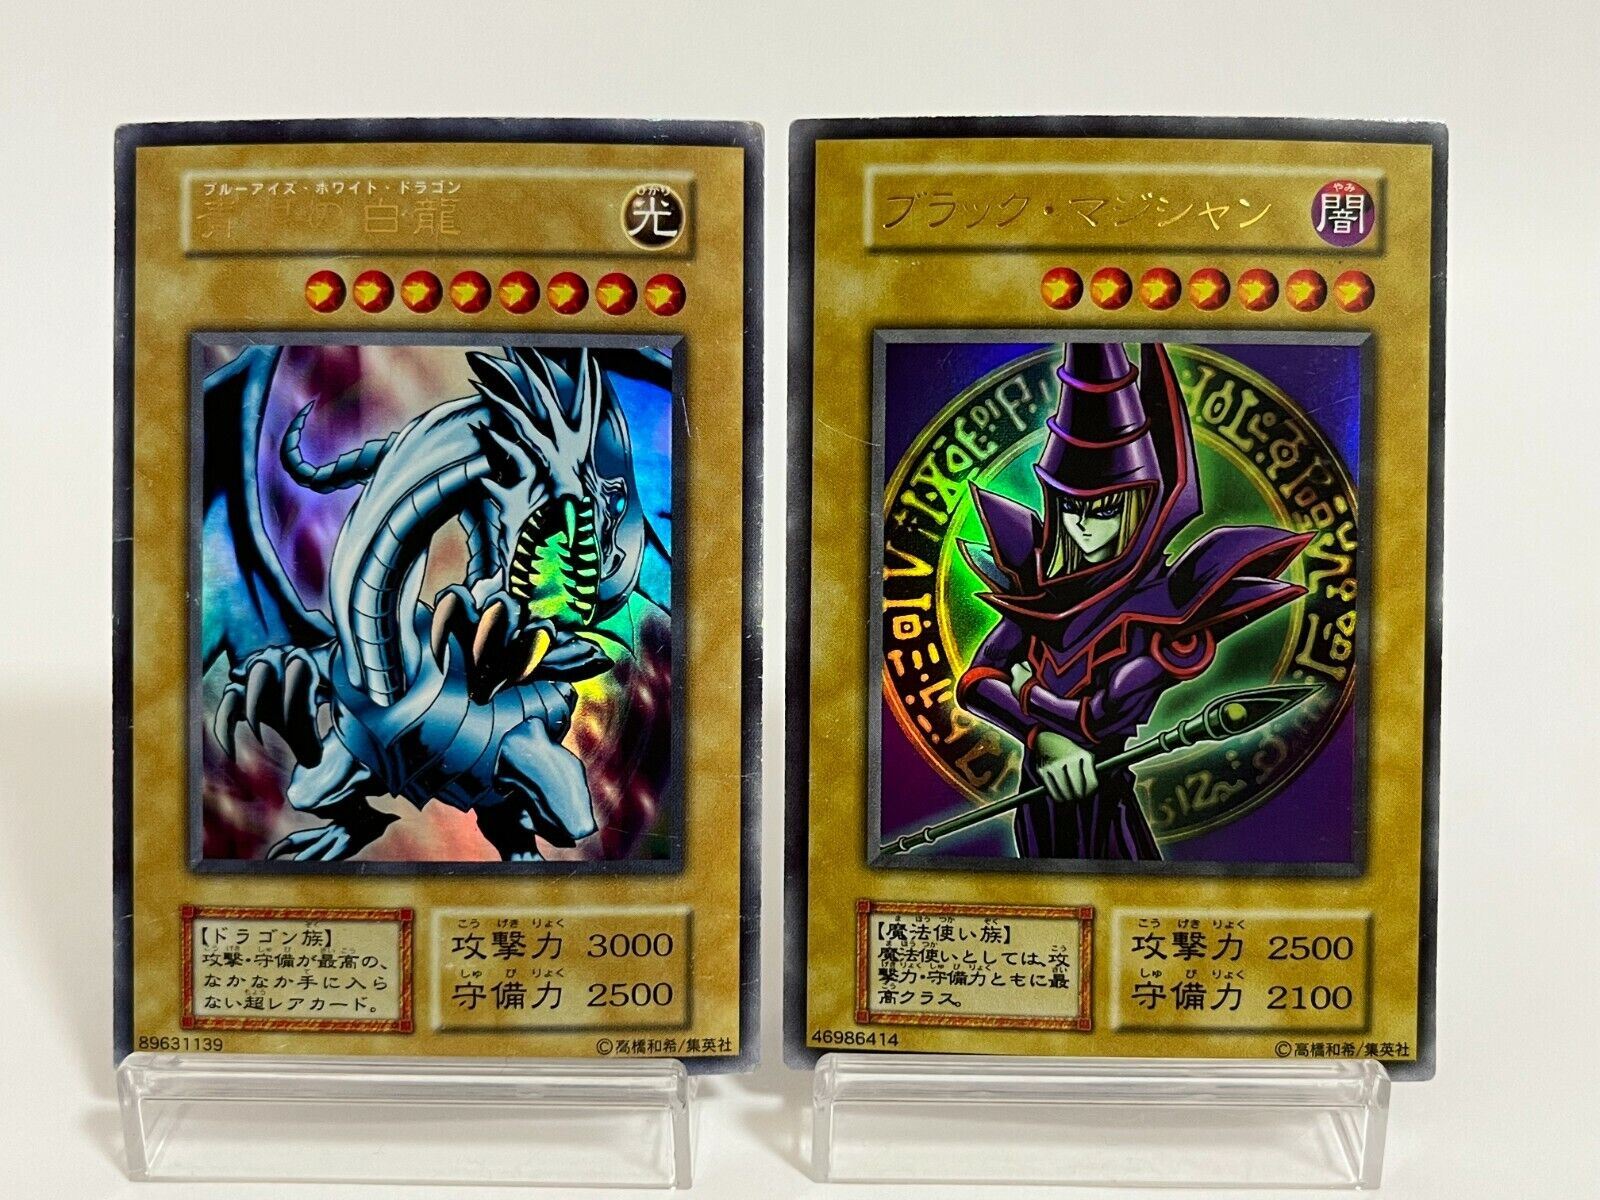 Buy Yu-Gi-Oh KONAMI Horus Black Flame Dragon LV.8 Trading Card from Japan -  Buy authentic Plus exclusive items from Japan